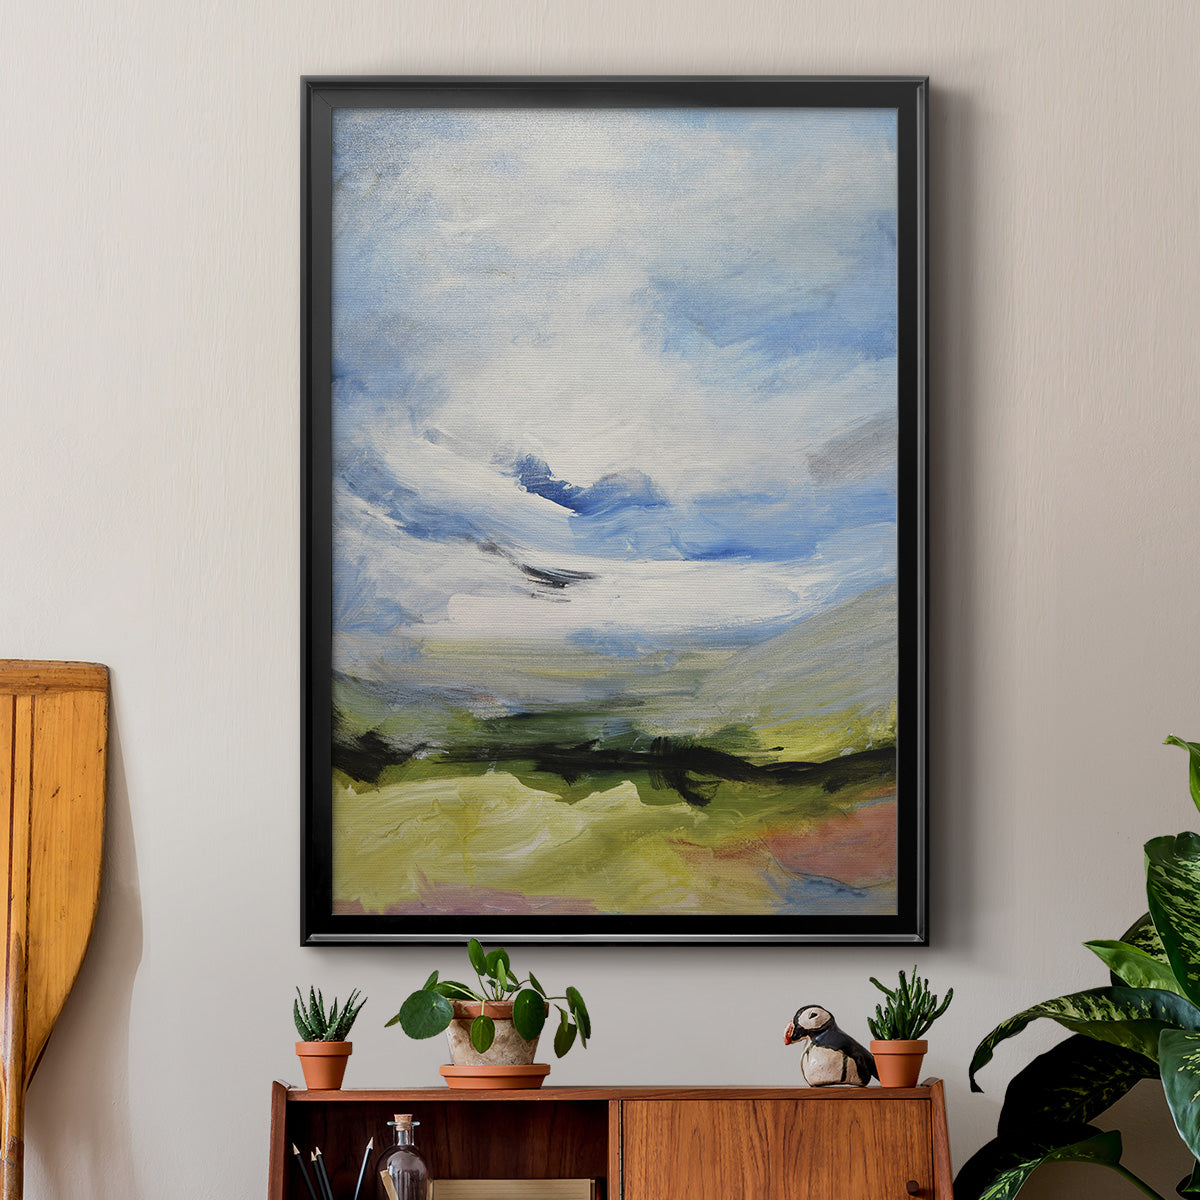 Around The Clouds IV Premium Framed Print - Ready to Hang